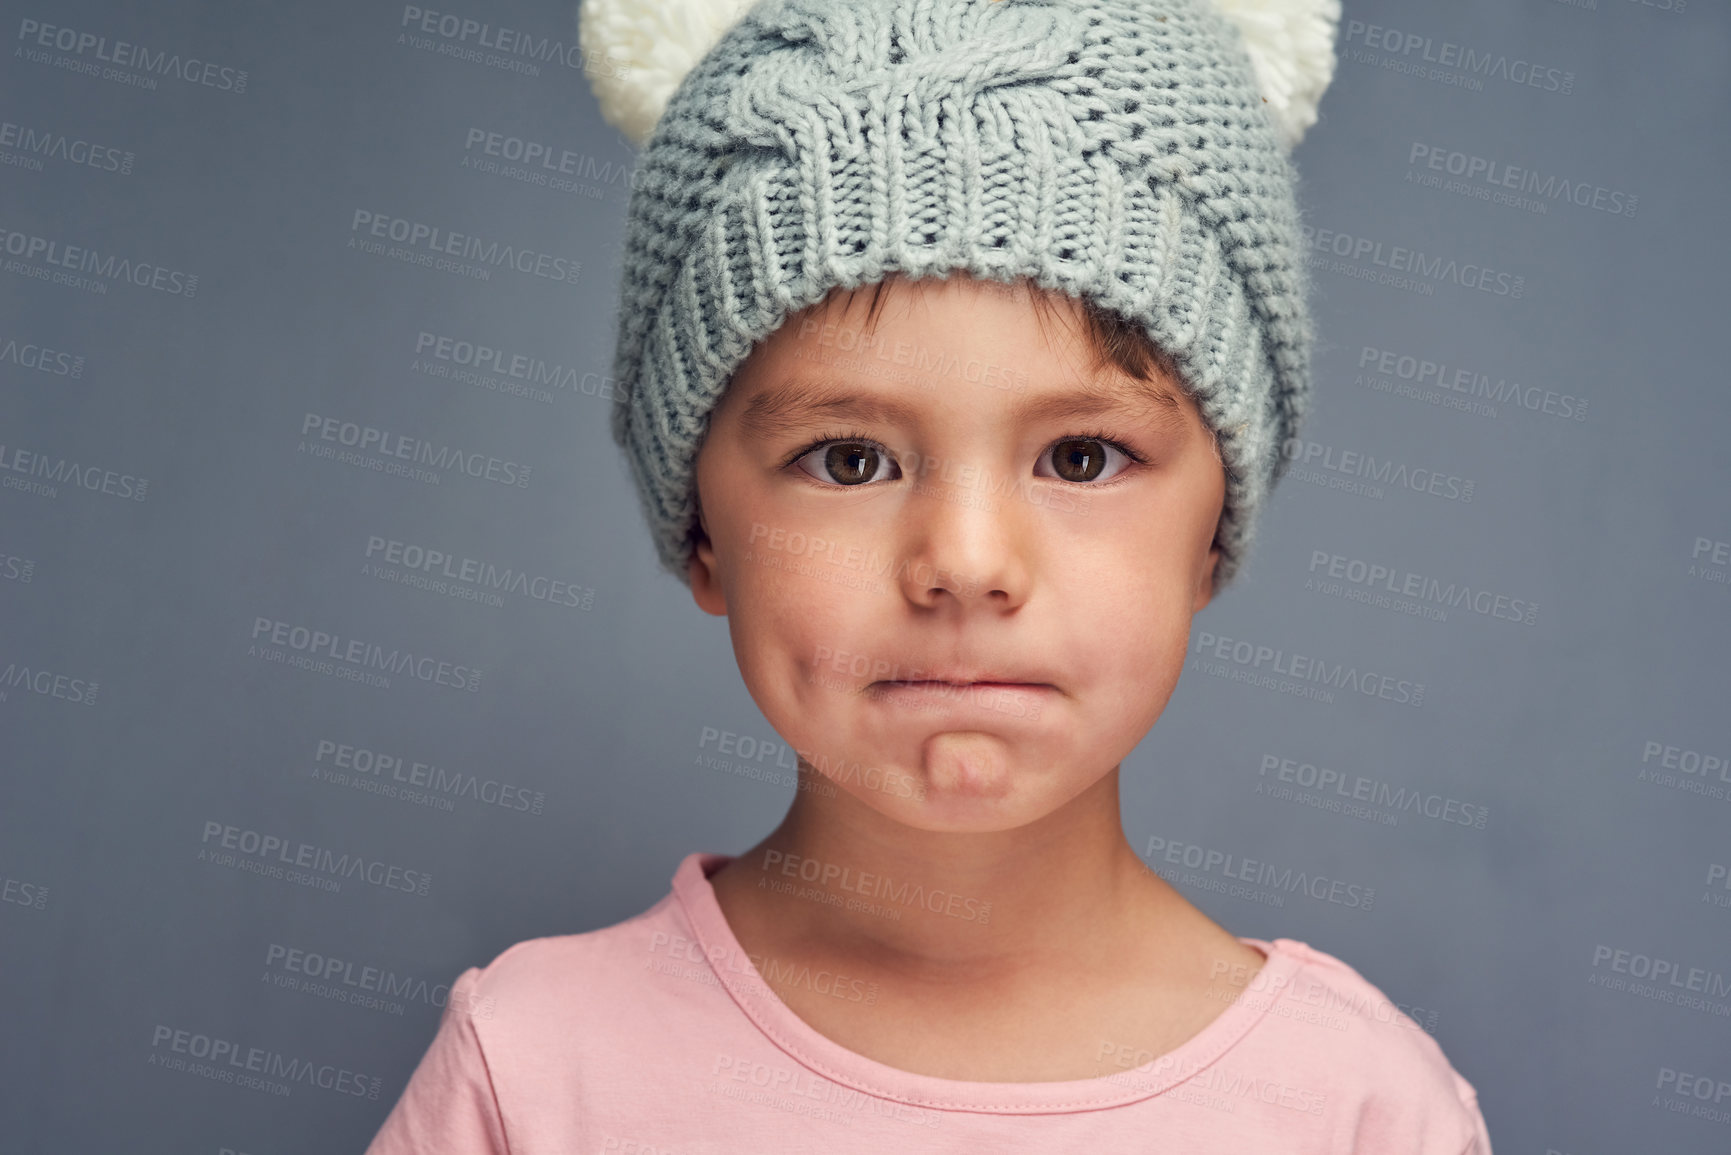 Buy stock photo Studio portrait of an adorable little boy posing against a gray background